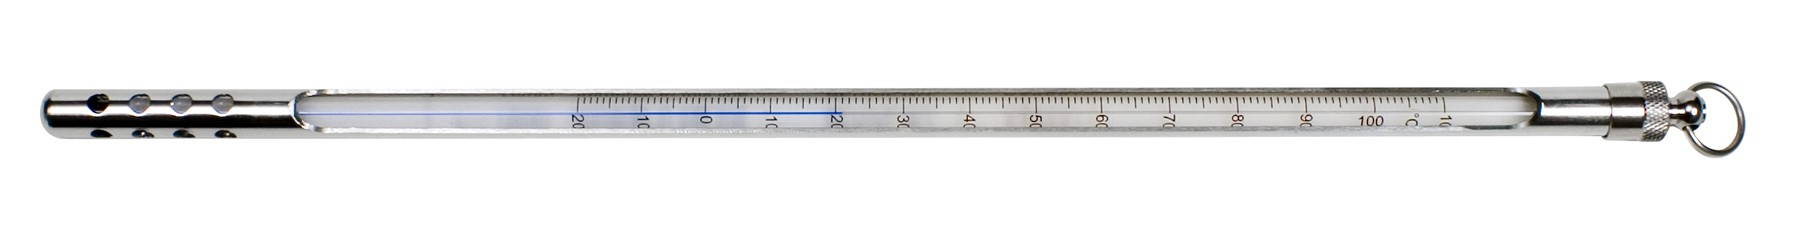 H-B DURAC Plus Armored Liquid-In-Glass Thermometer; 0 to 300F, 76mm Immersion, Organic Liquid Fill